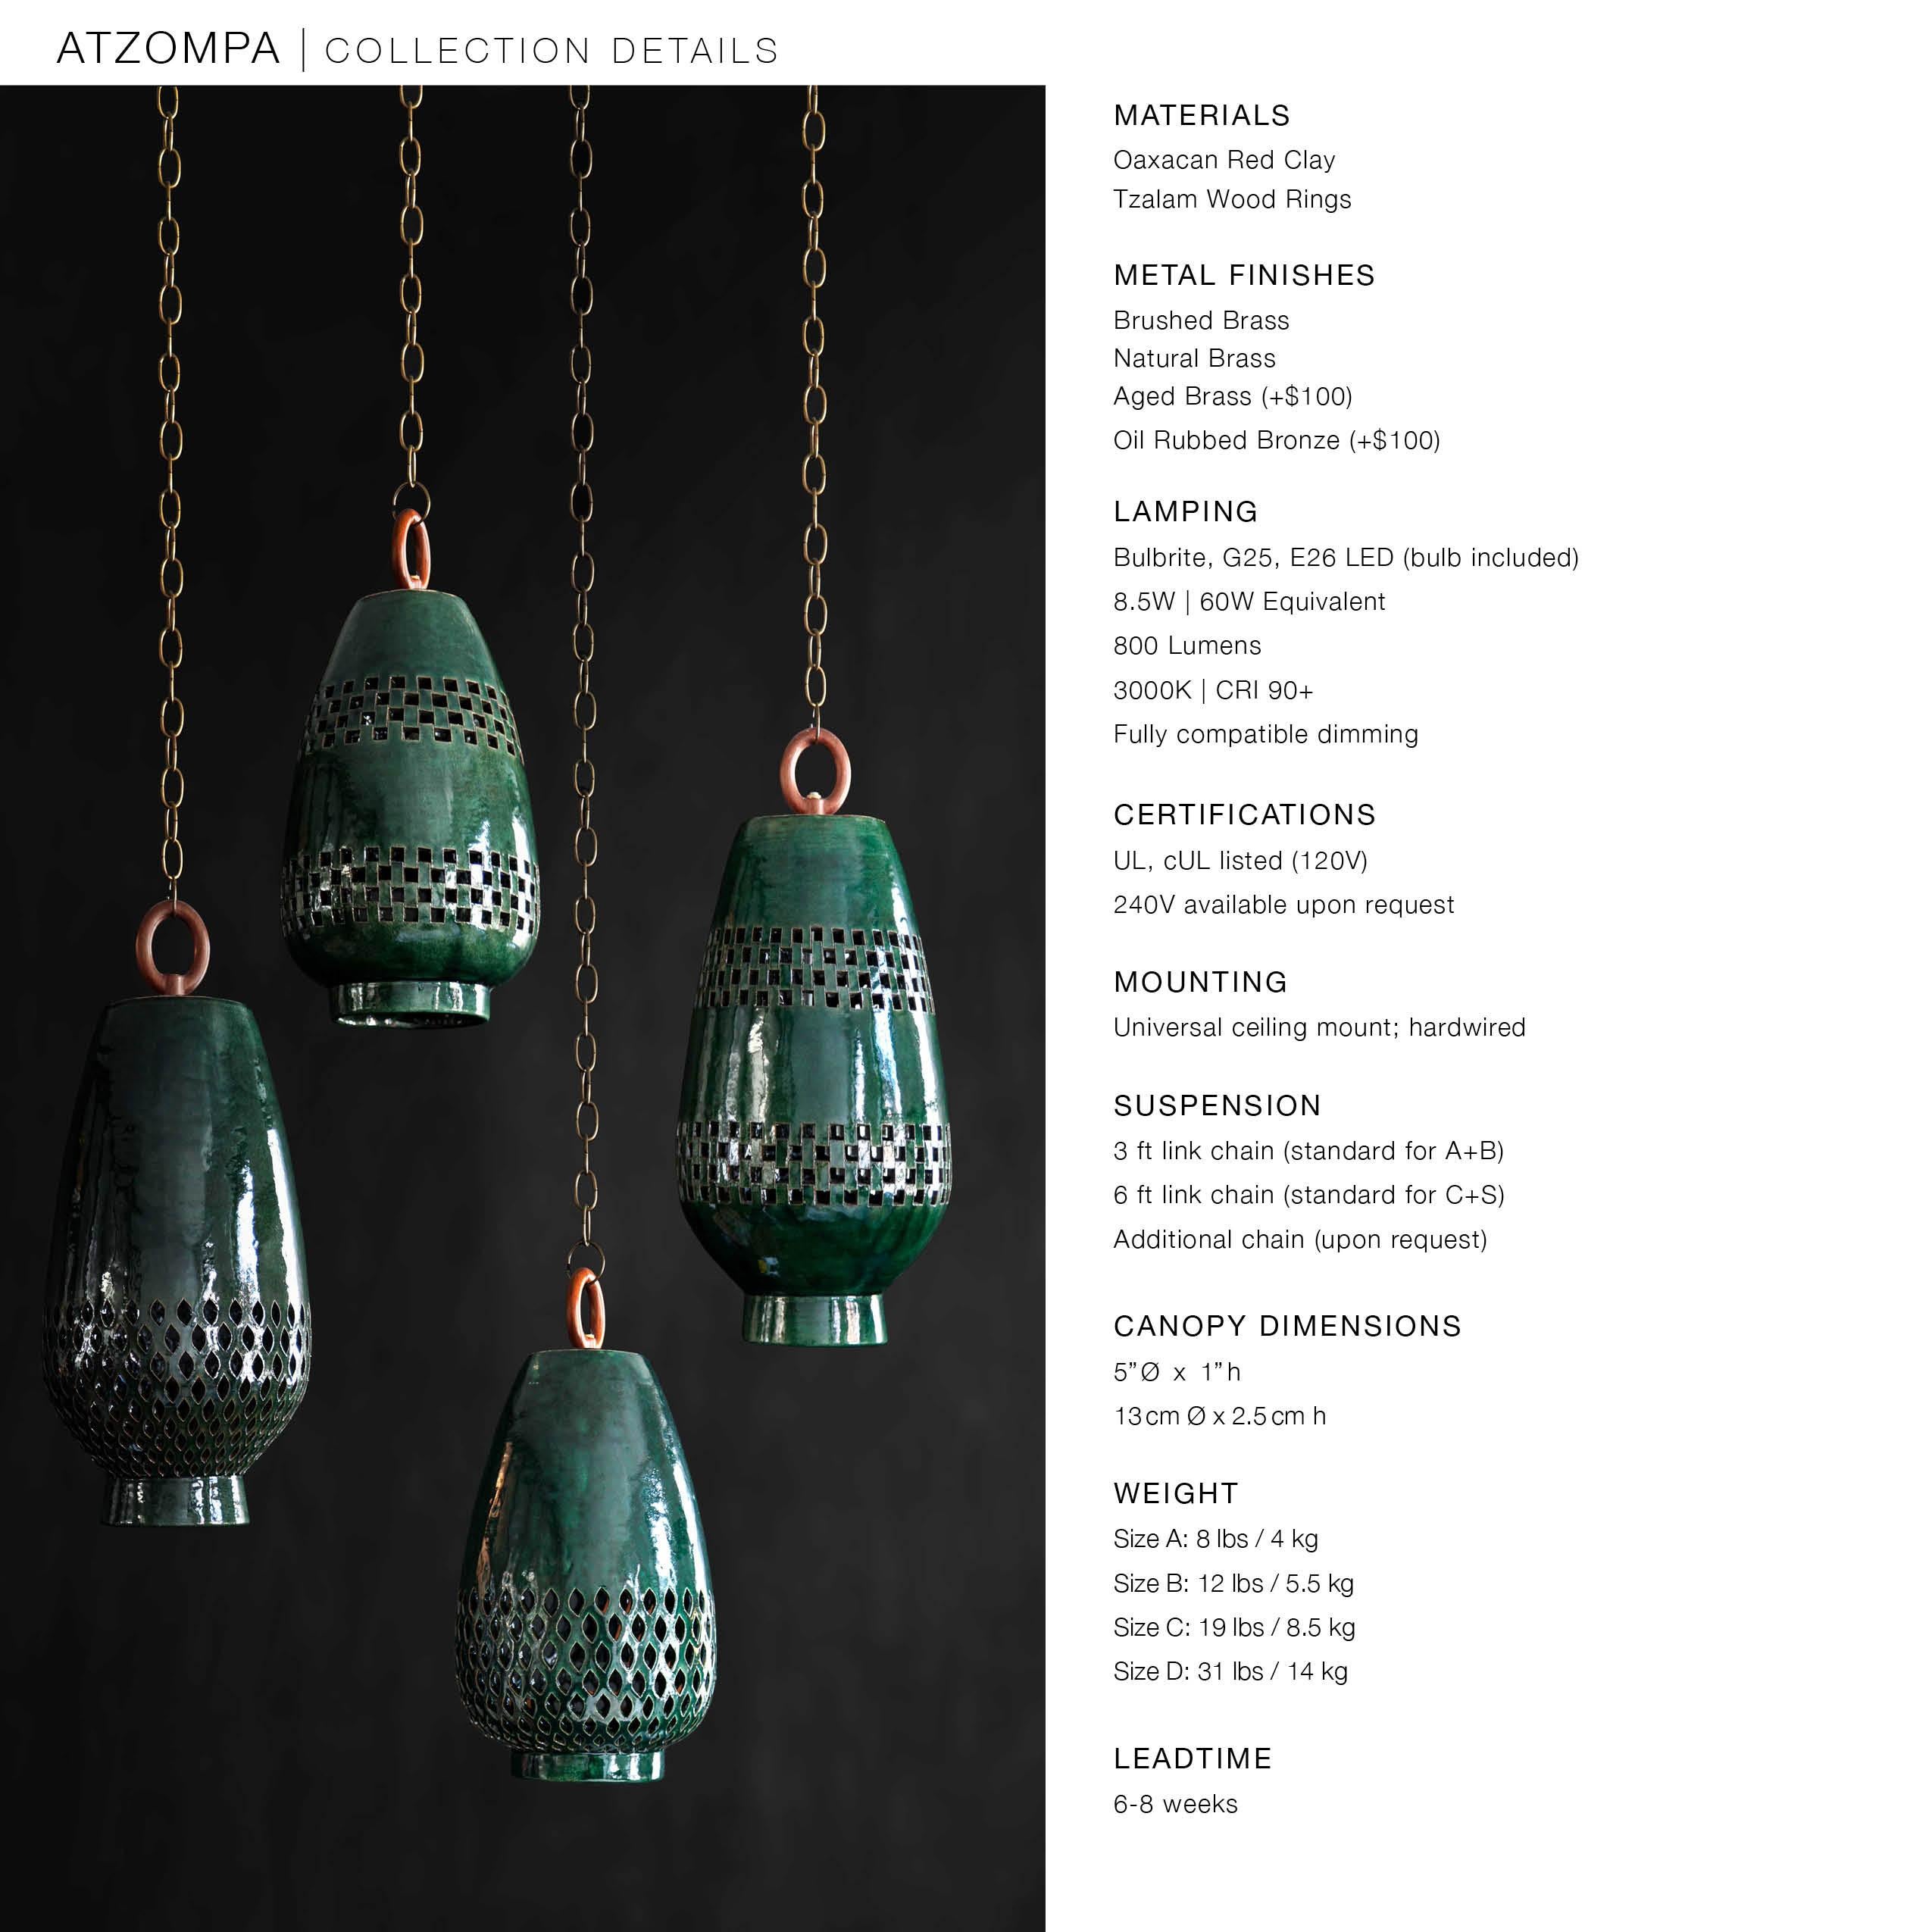 Small Emerald Ceramic Pendant Light, Aged Brass, Diamantes Atzompa Collection In New Condition For Sale In New York, NY